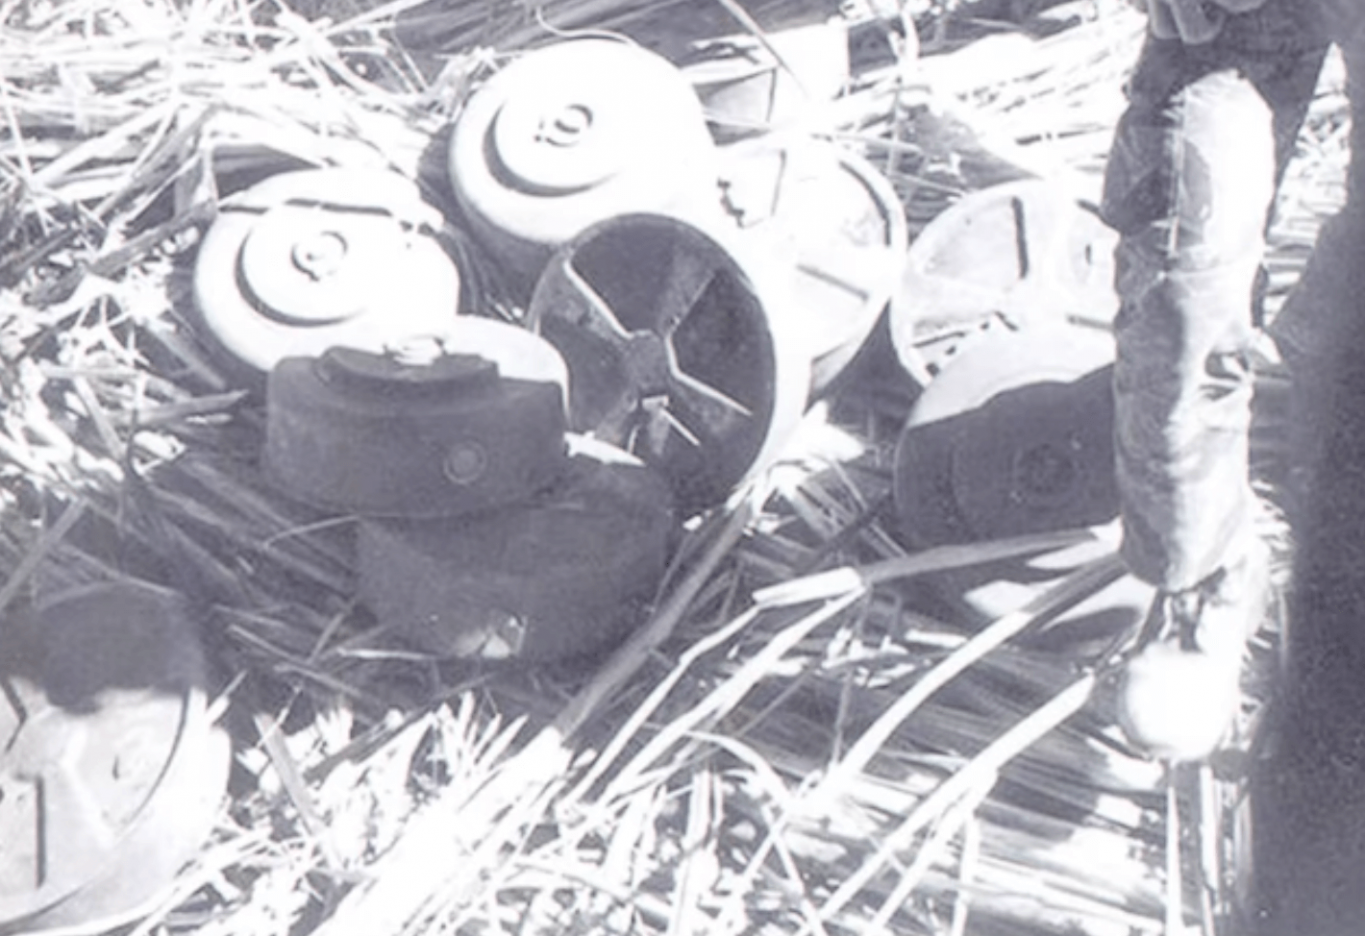 A pile of canisters on a hay-covered ground.